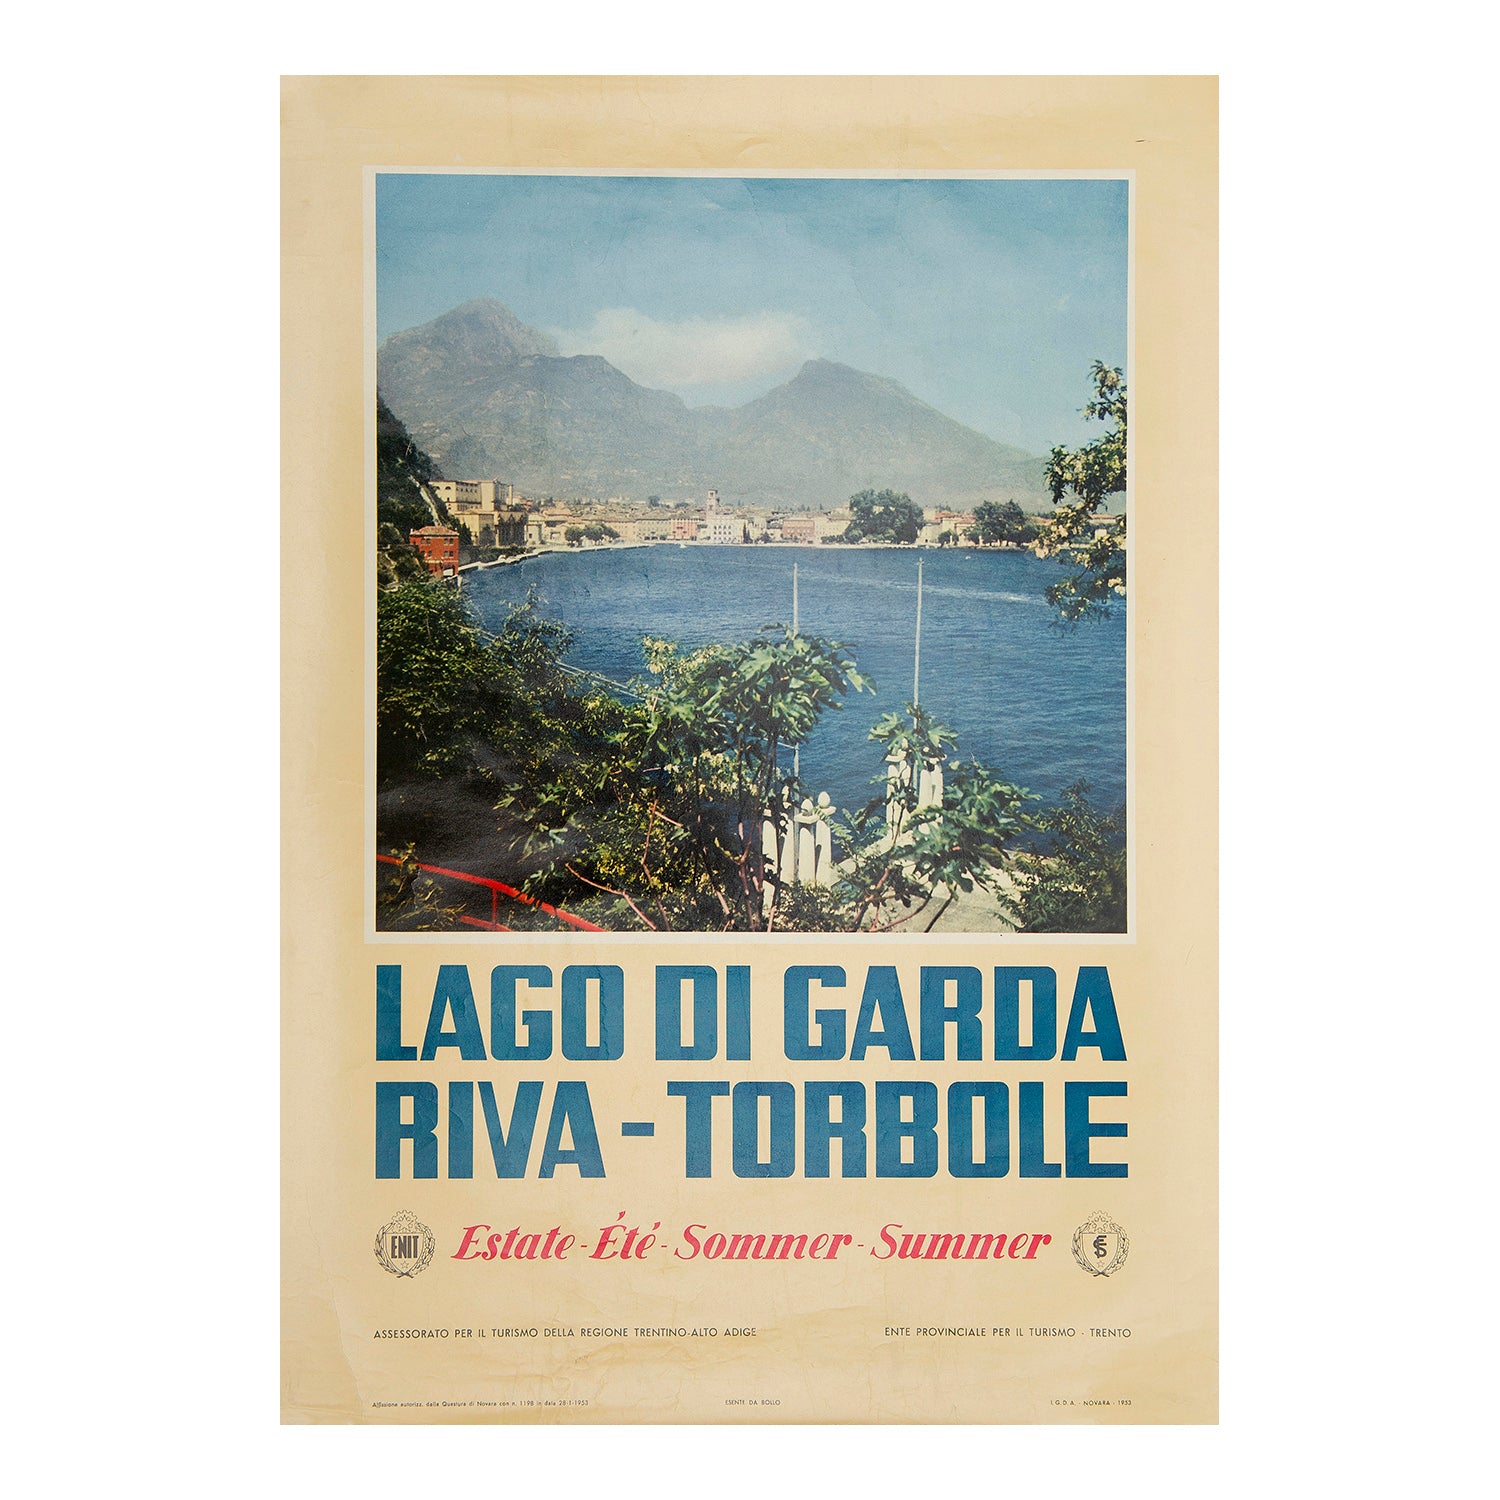 An original poster, published by the Italian Tourist Board for Lake Garda in northern Italy, 1953. The photographic image features the picturesque town of Riva, located on the Lake’s northernmost tip.